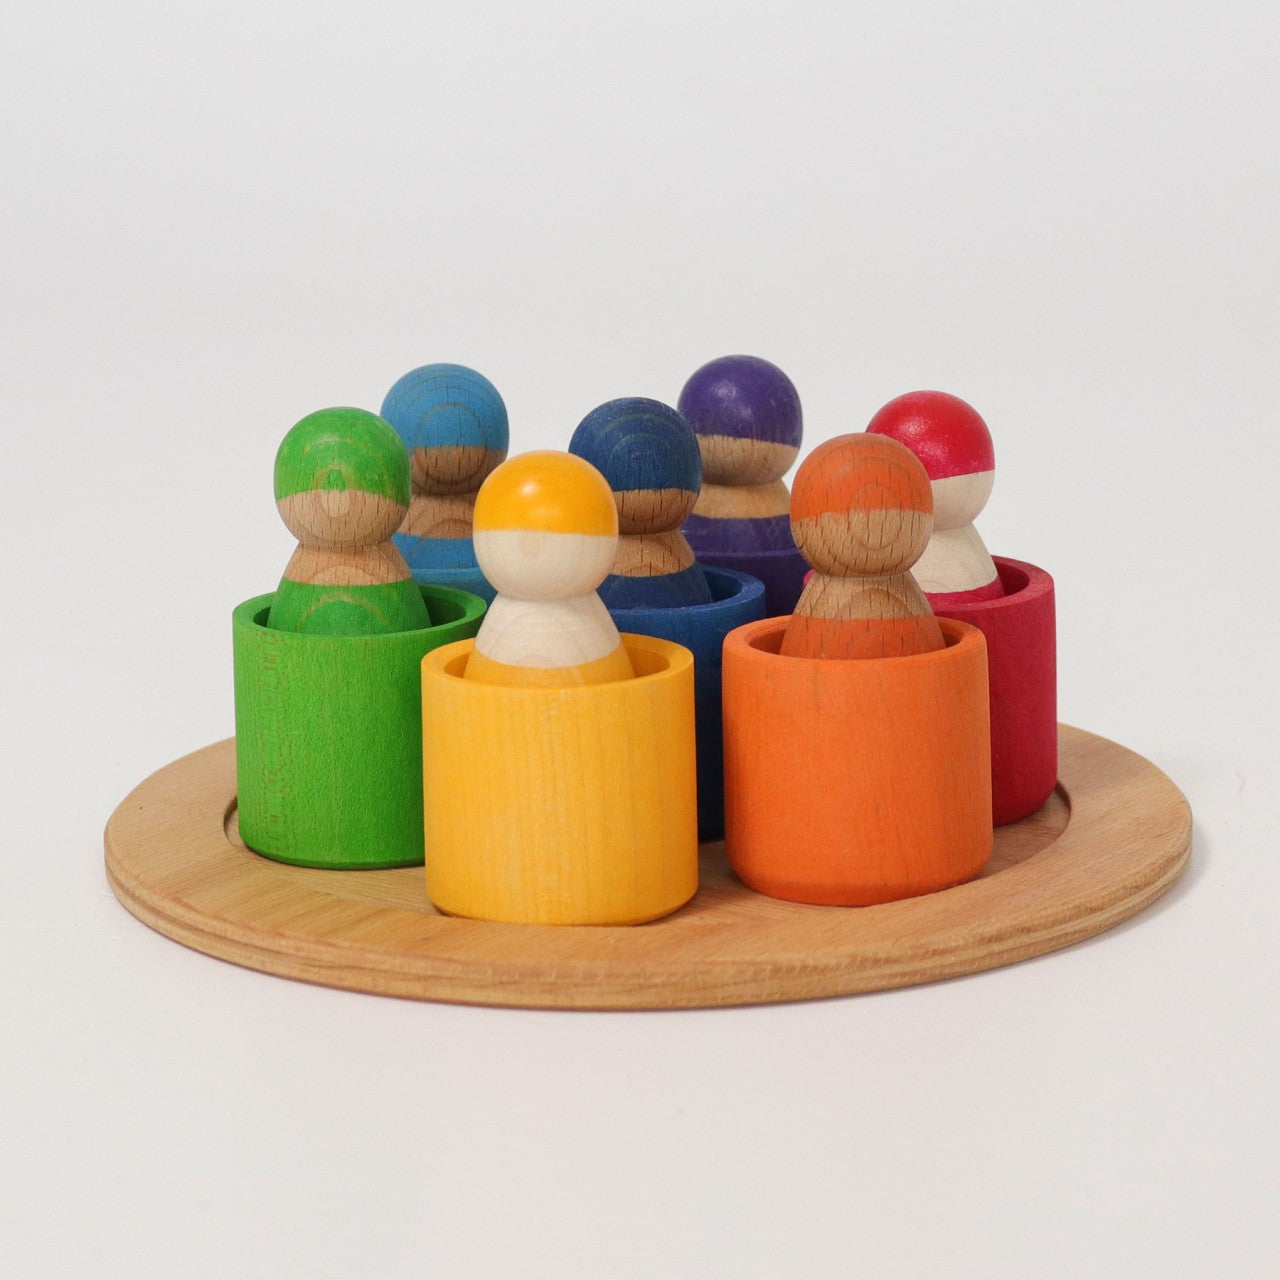 Grimm's - 7 Friends in 7 Bowls - Wooden People